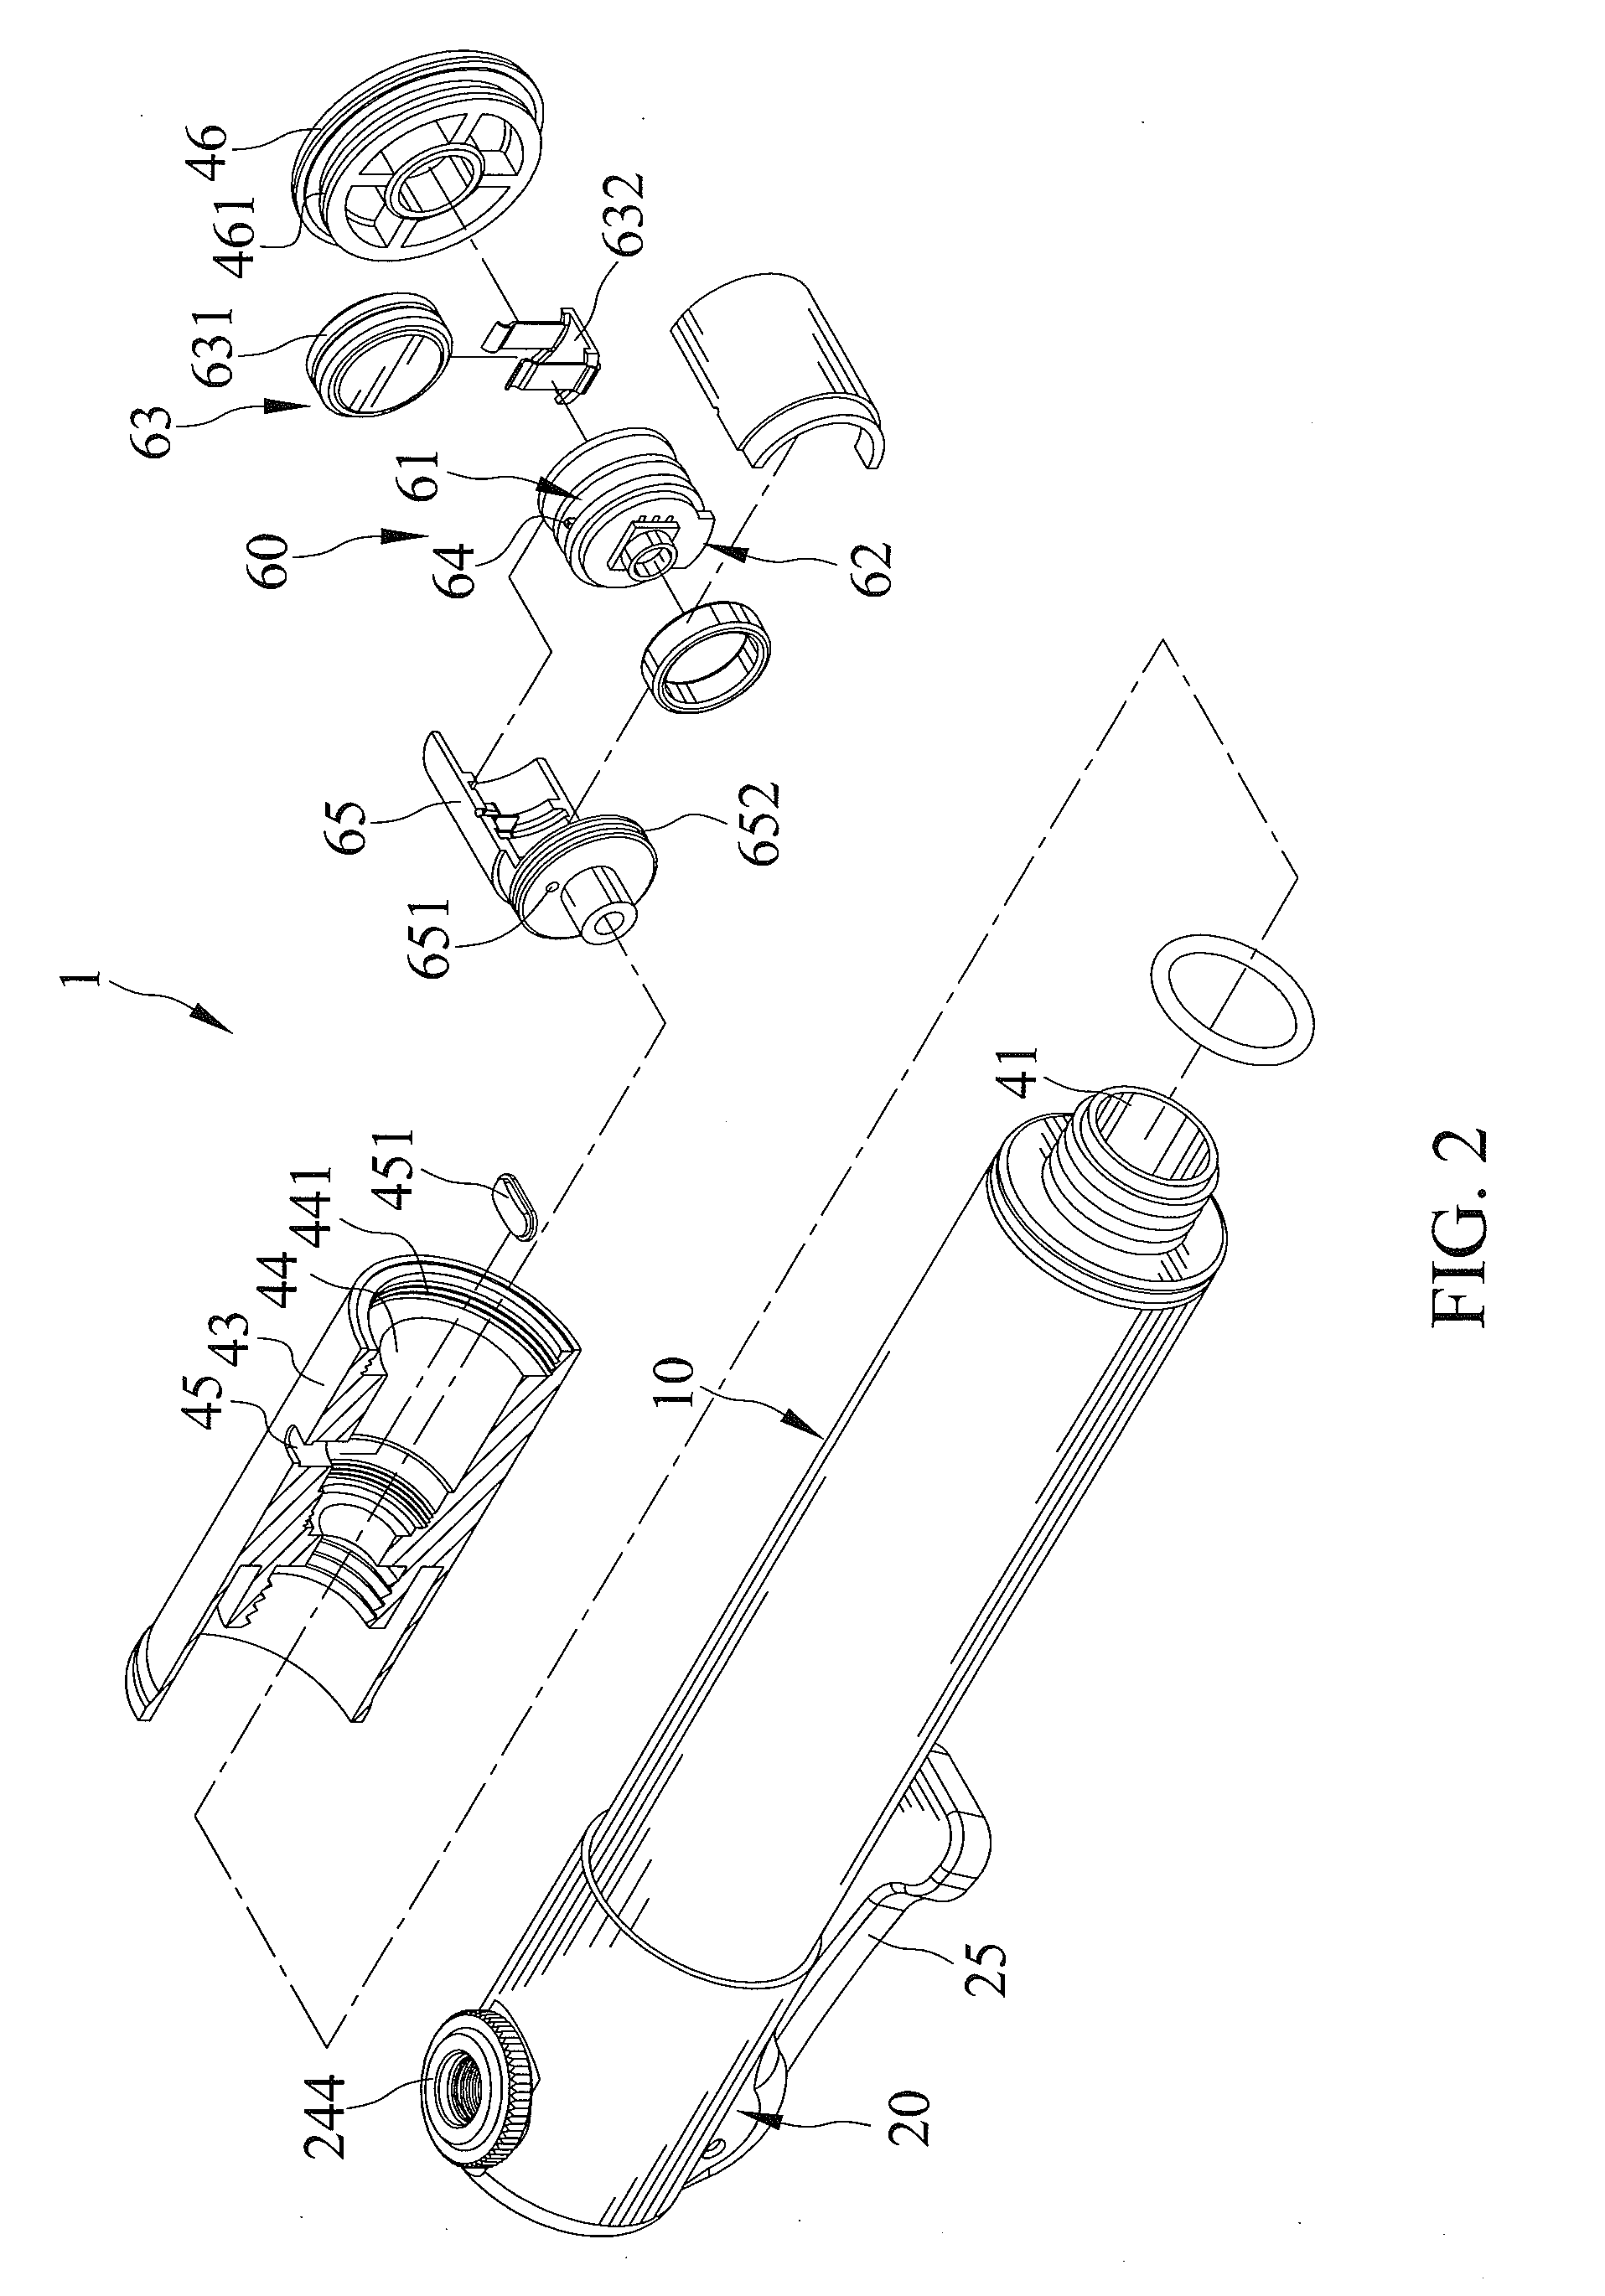 Portable Pump Capable of Transmitting Air Pressure Value Via Wireless Transmission to Mobile Electronic Device for Indication